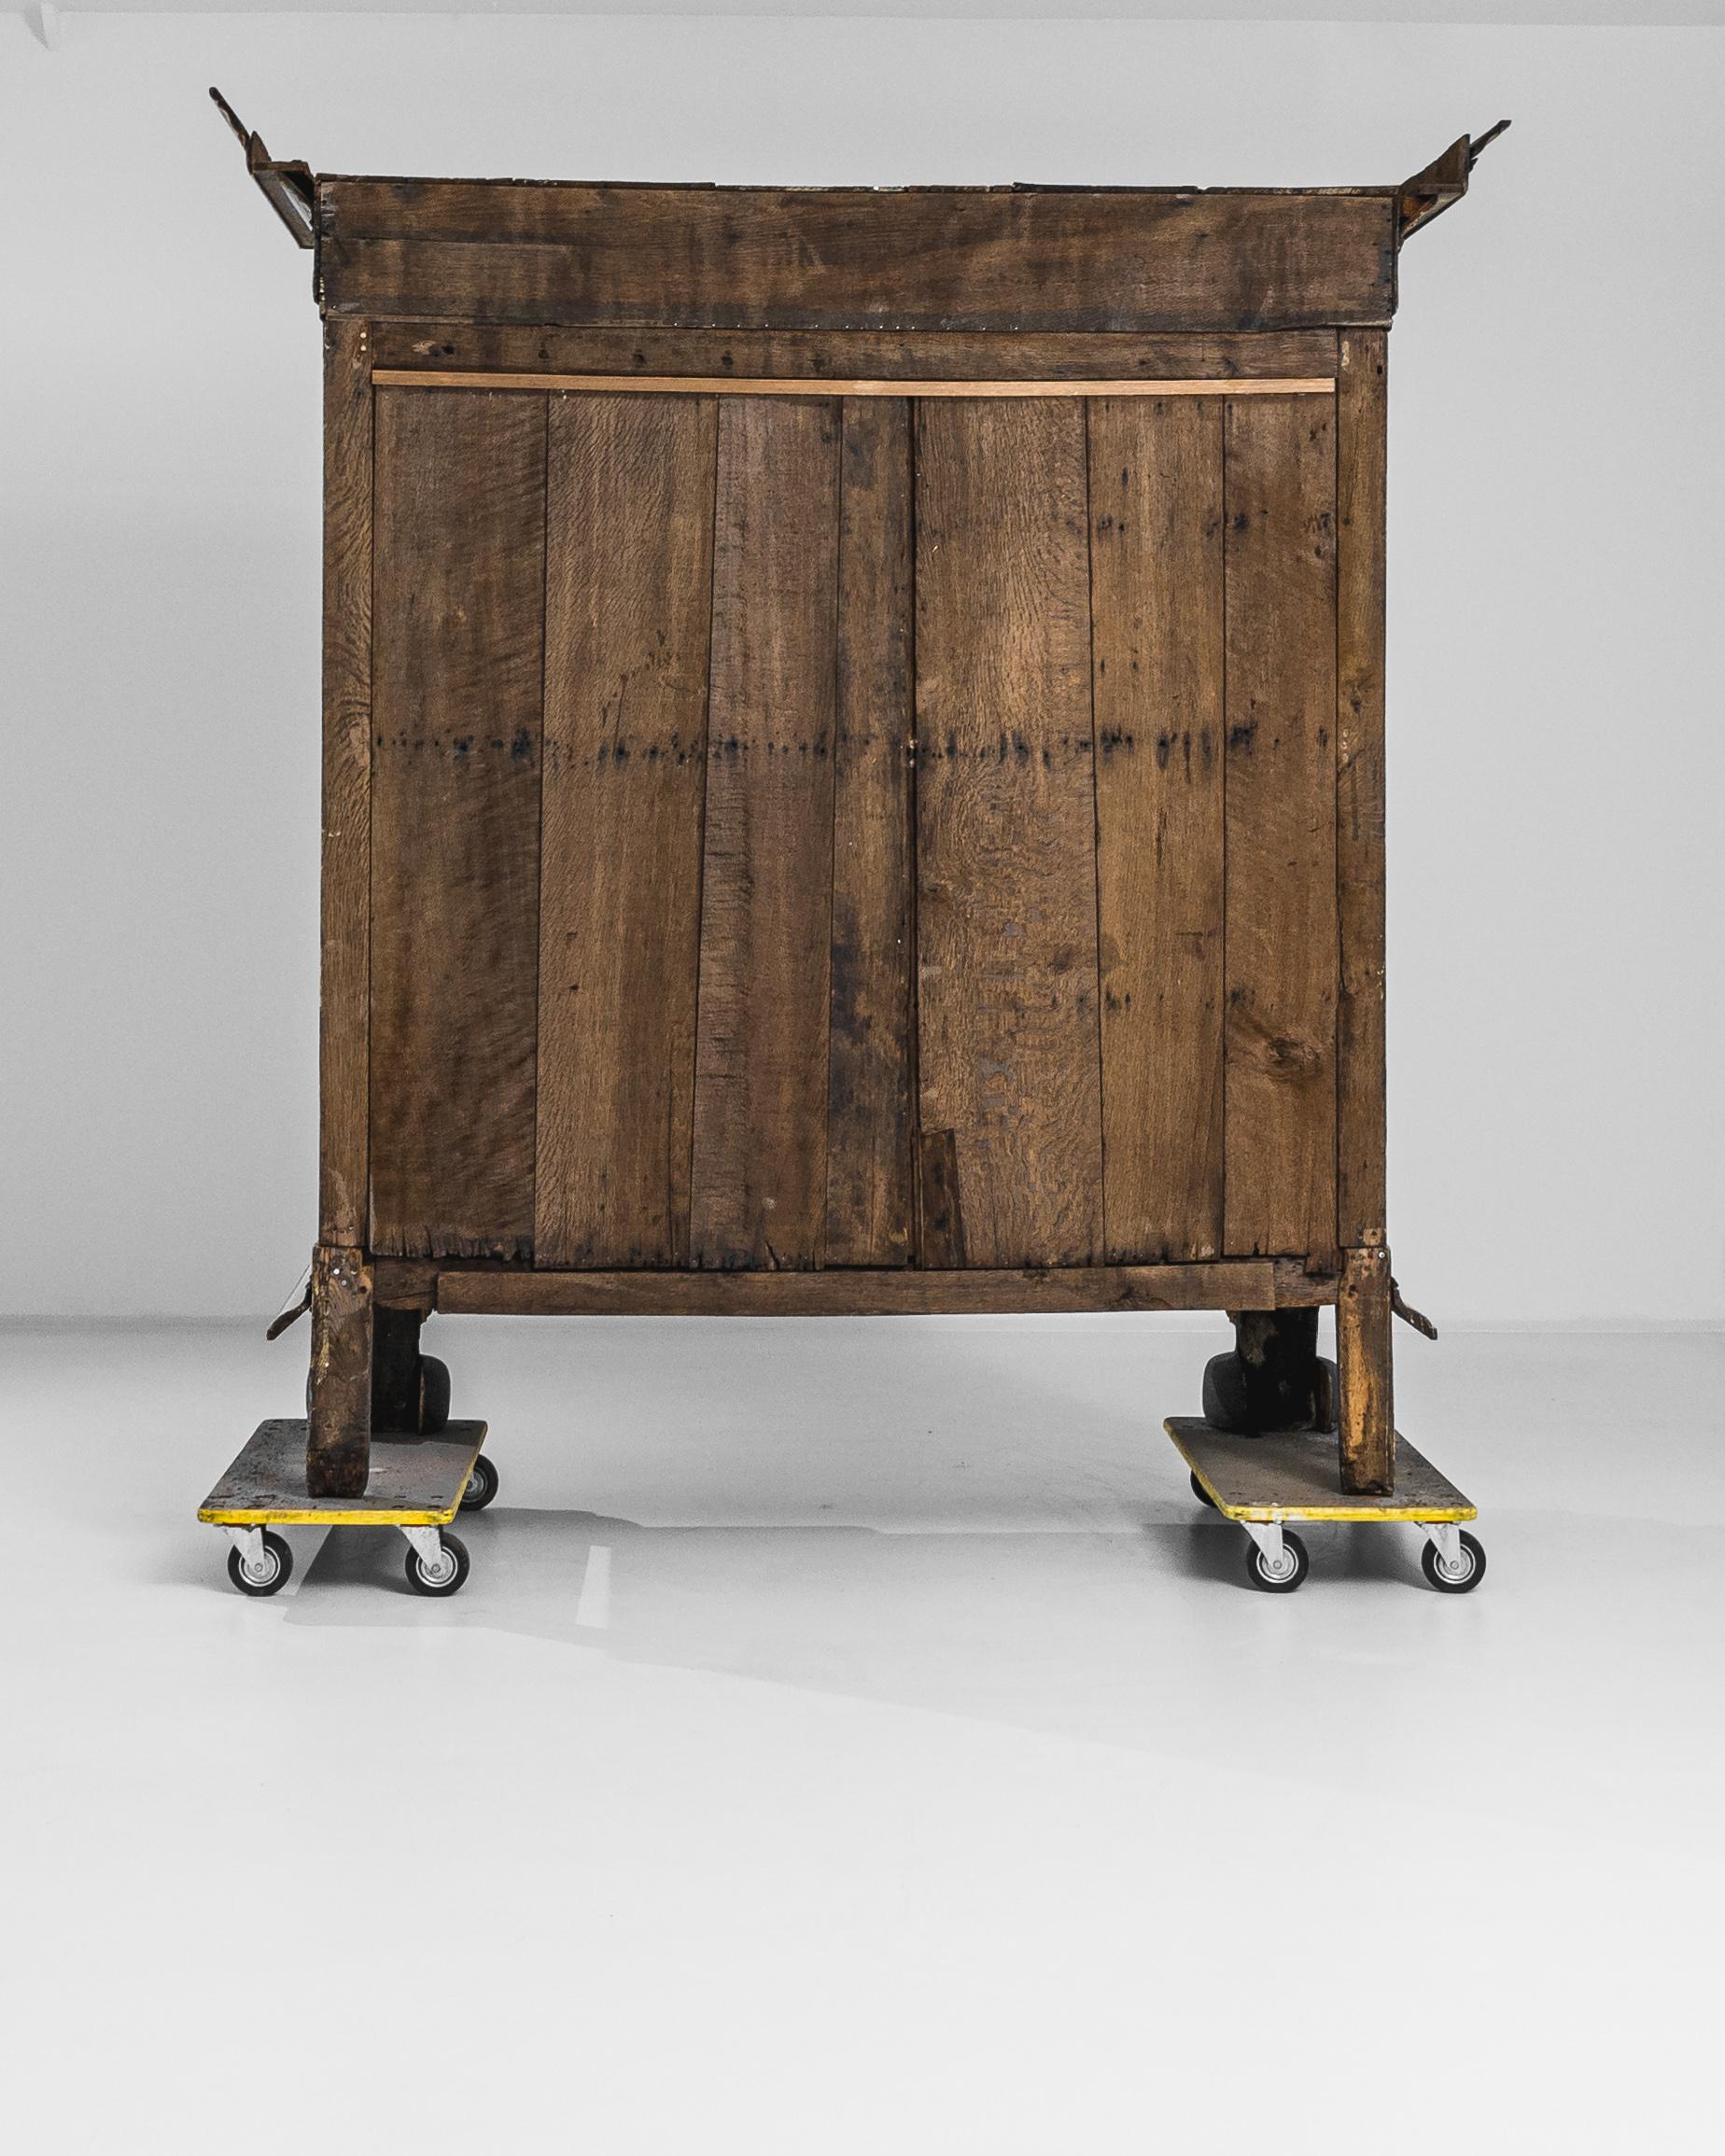 Step into the grandeur of the past with this remarkable 1780s Dutch Bleached Oak Cabinet. Standing tall and impressive, it boasts three column carvings—one on each side and one in the middle—each meticulously adorned with intricate hand-carved